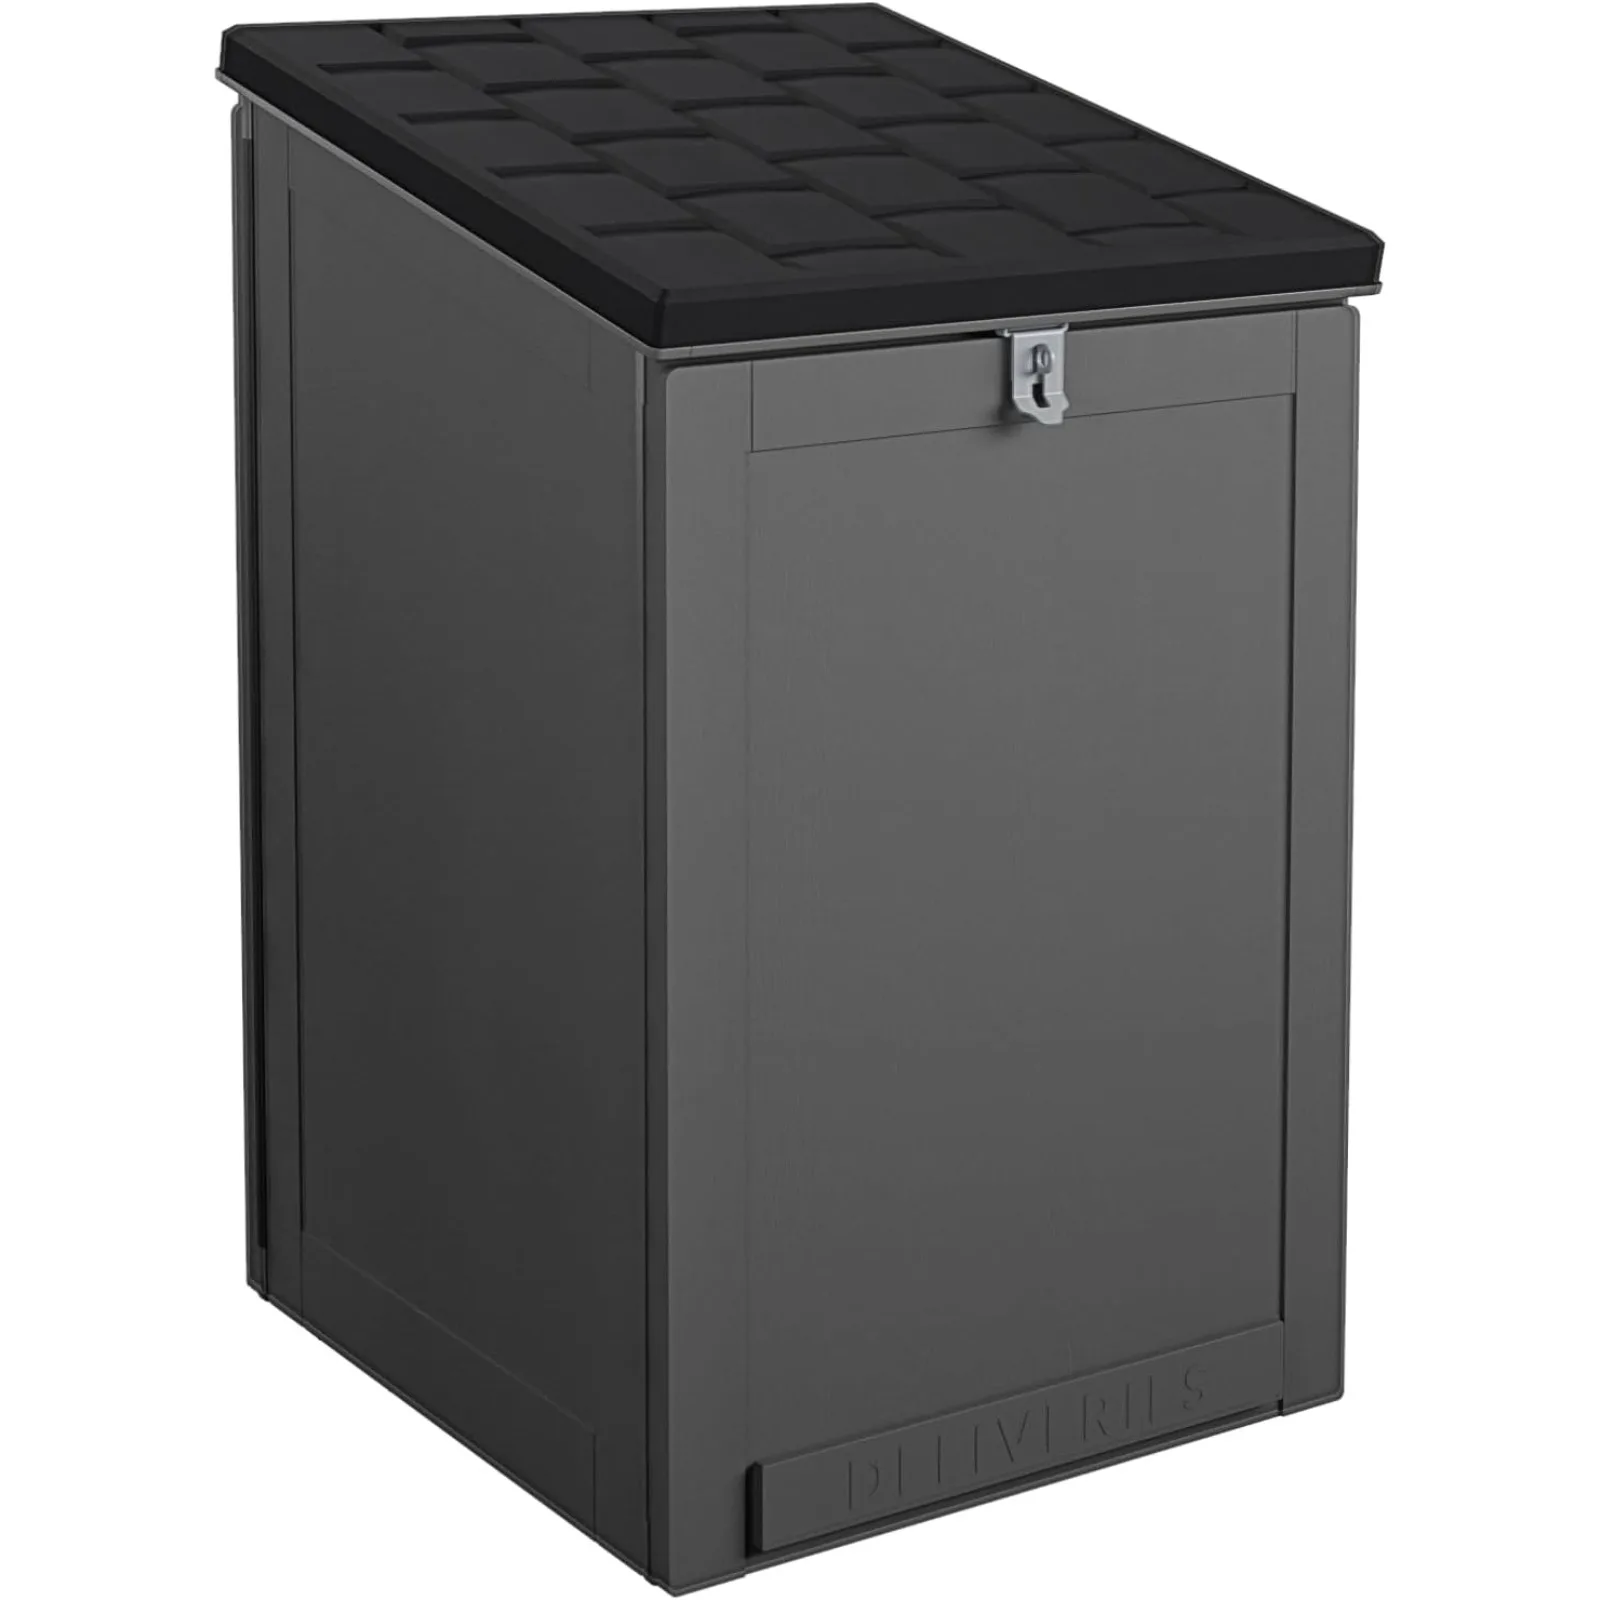 

US Cosco-Outdoor Living BoxGuard, Large Lockable Package Delivery and Storage Box, 6.3 cubic feet, Black and Charcoal